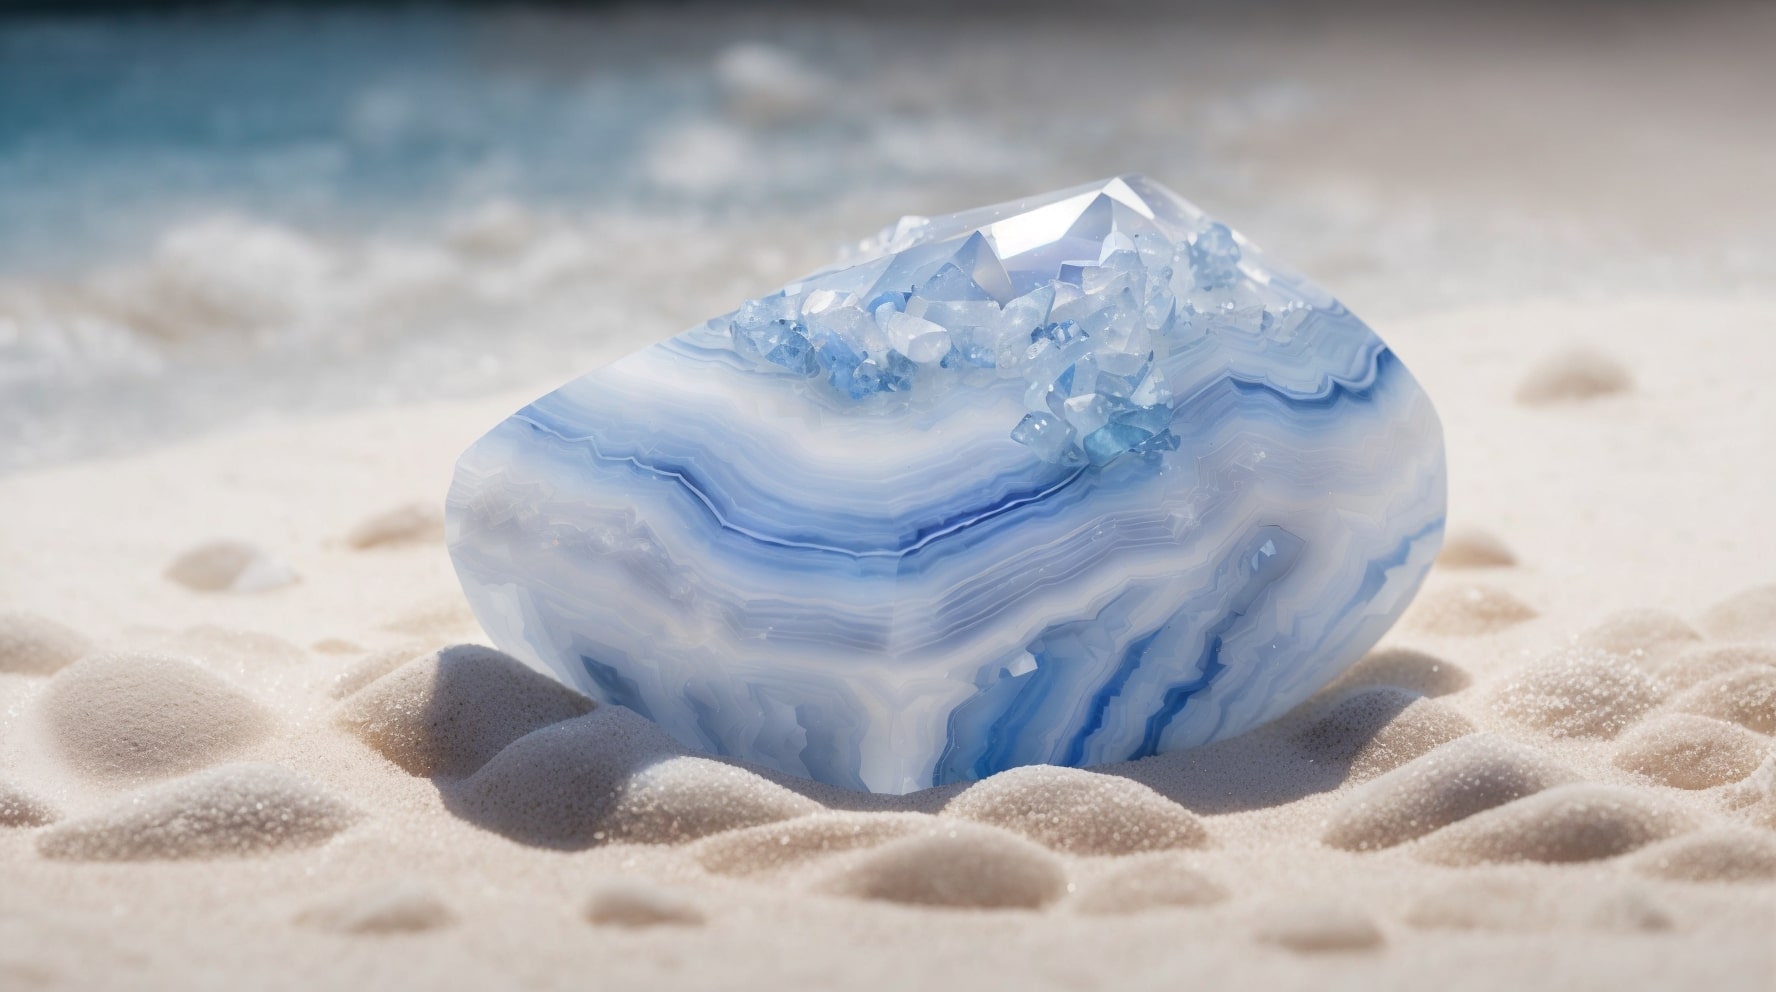 Blue lace agate properties resting in white sand